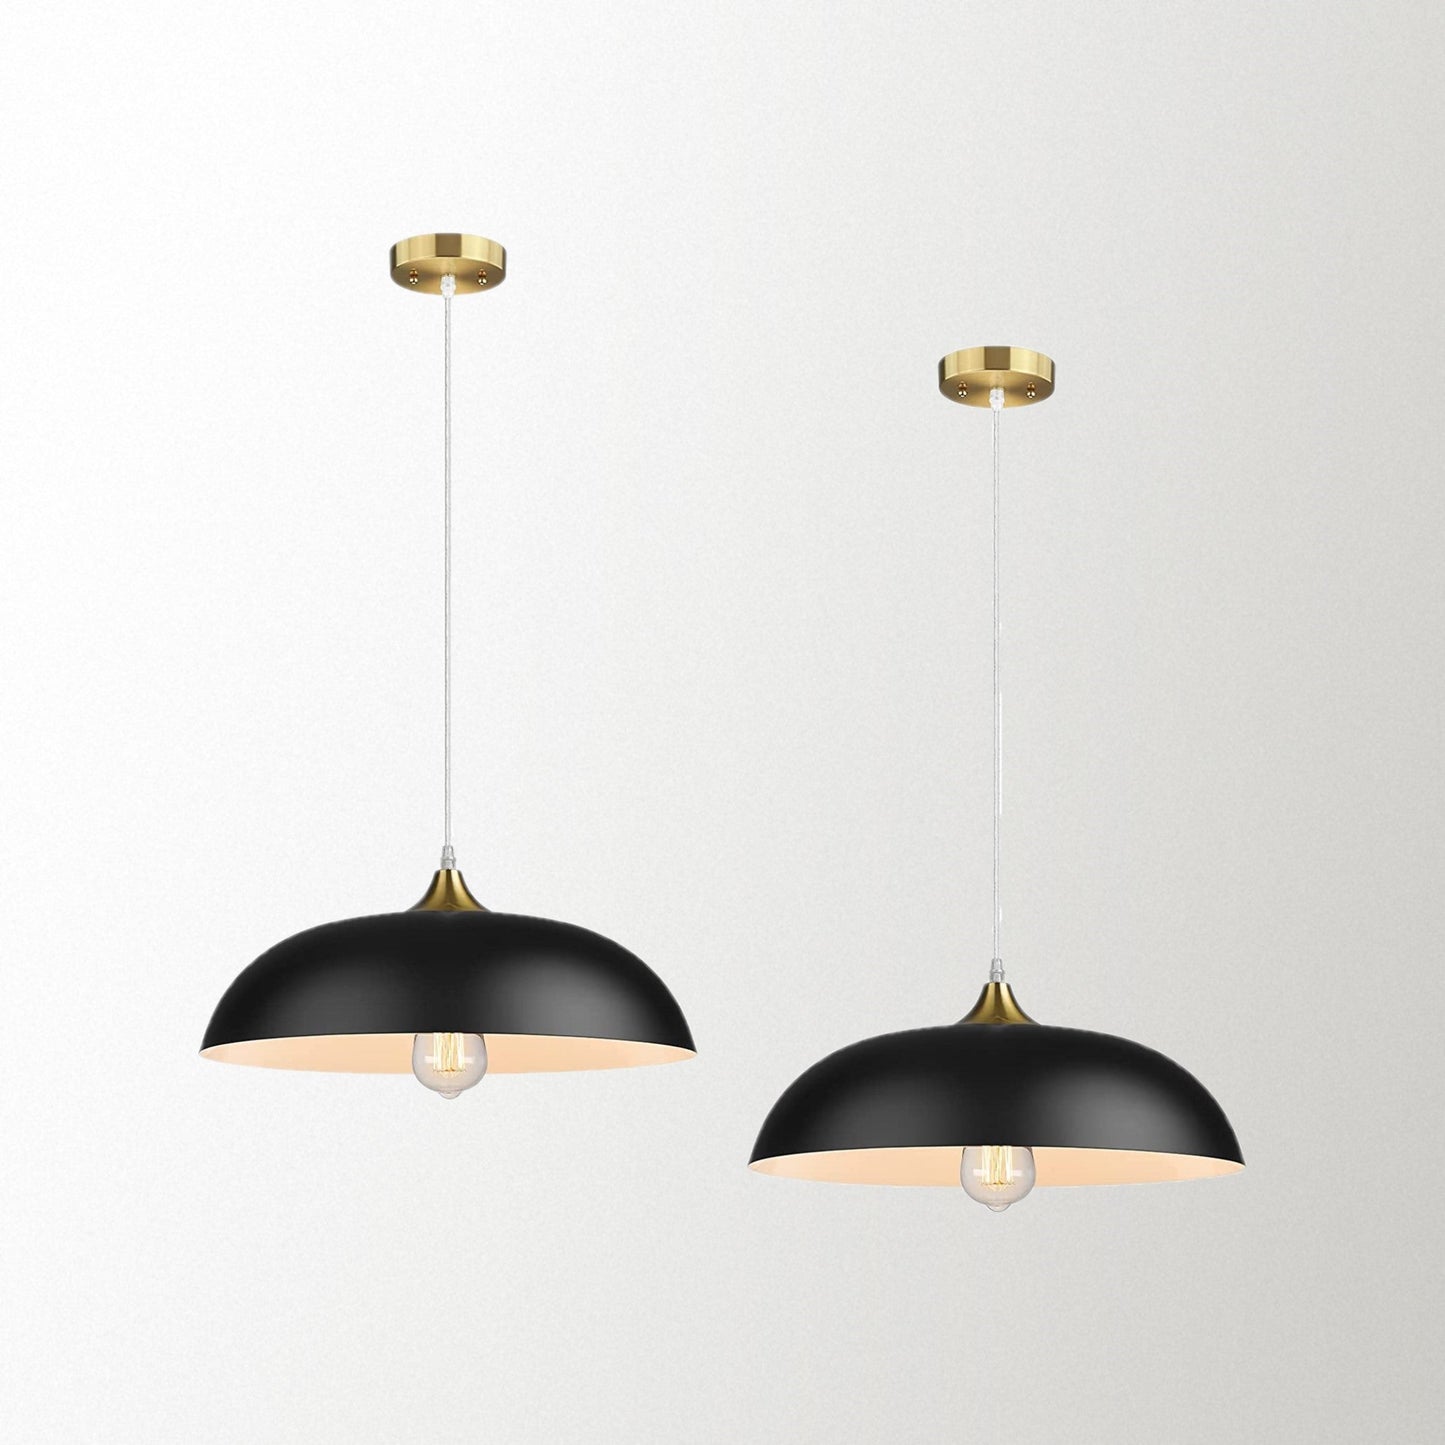 
                  
                    Emliviar Industrial Pendant Lighting 13", 2-Pack Modern Hanging Light Fixtures with Metal Dome Shade, Black and Gold Finish, 1901M-2 BG/BK
                  
                